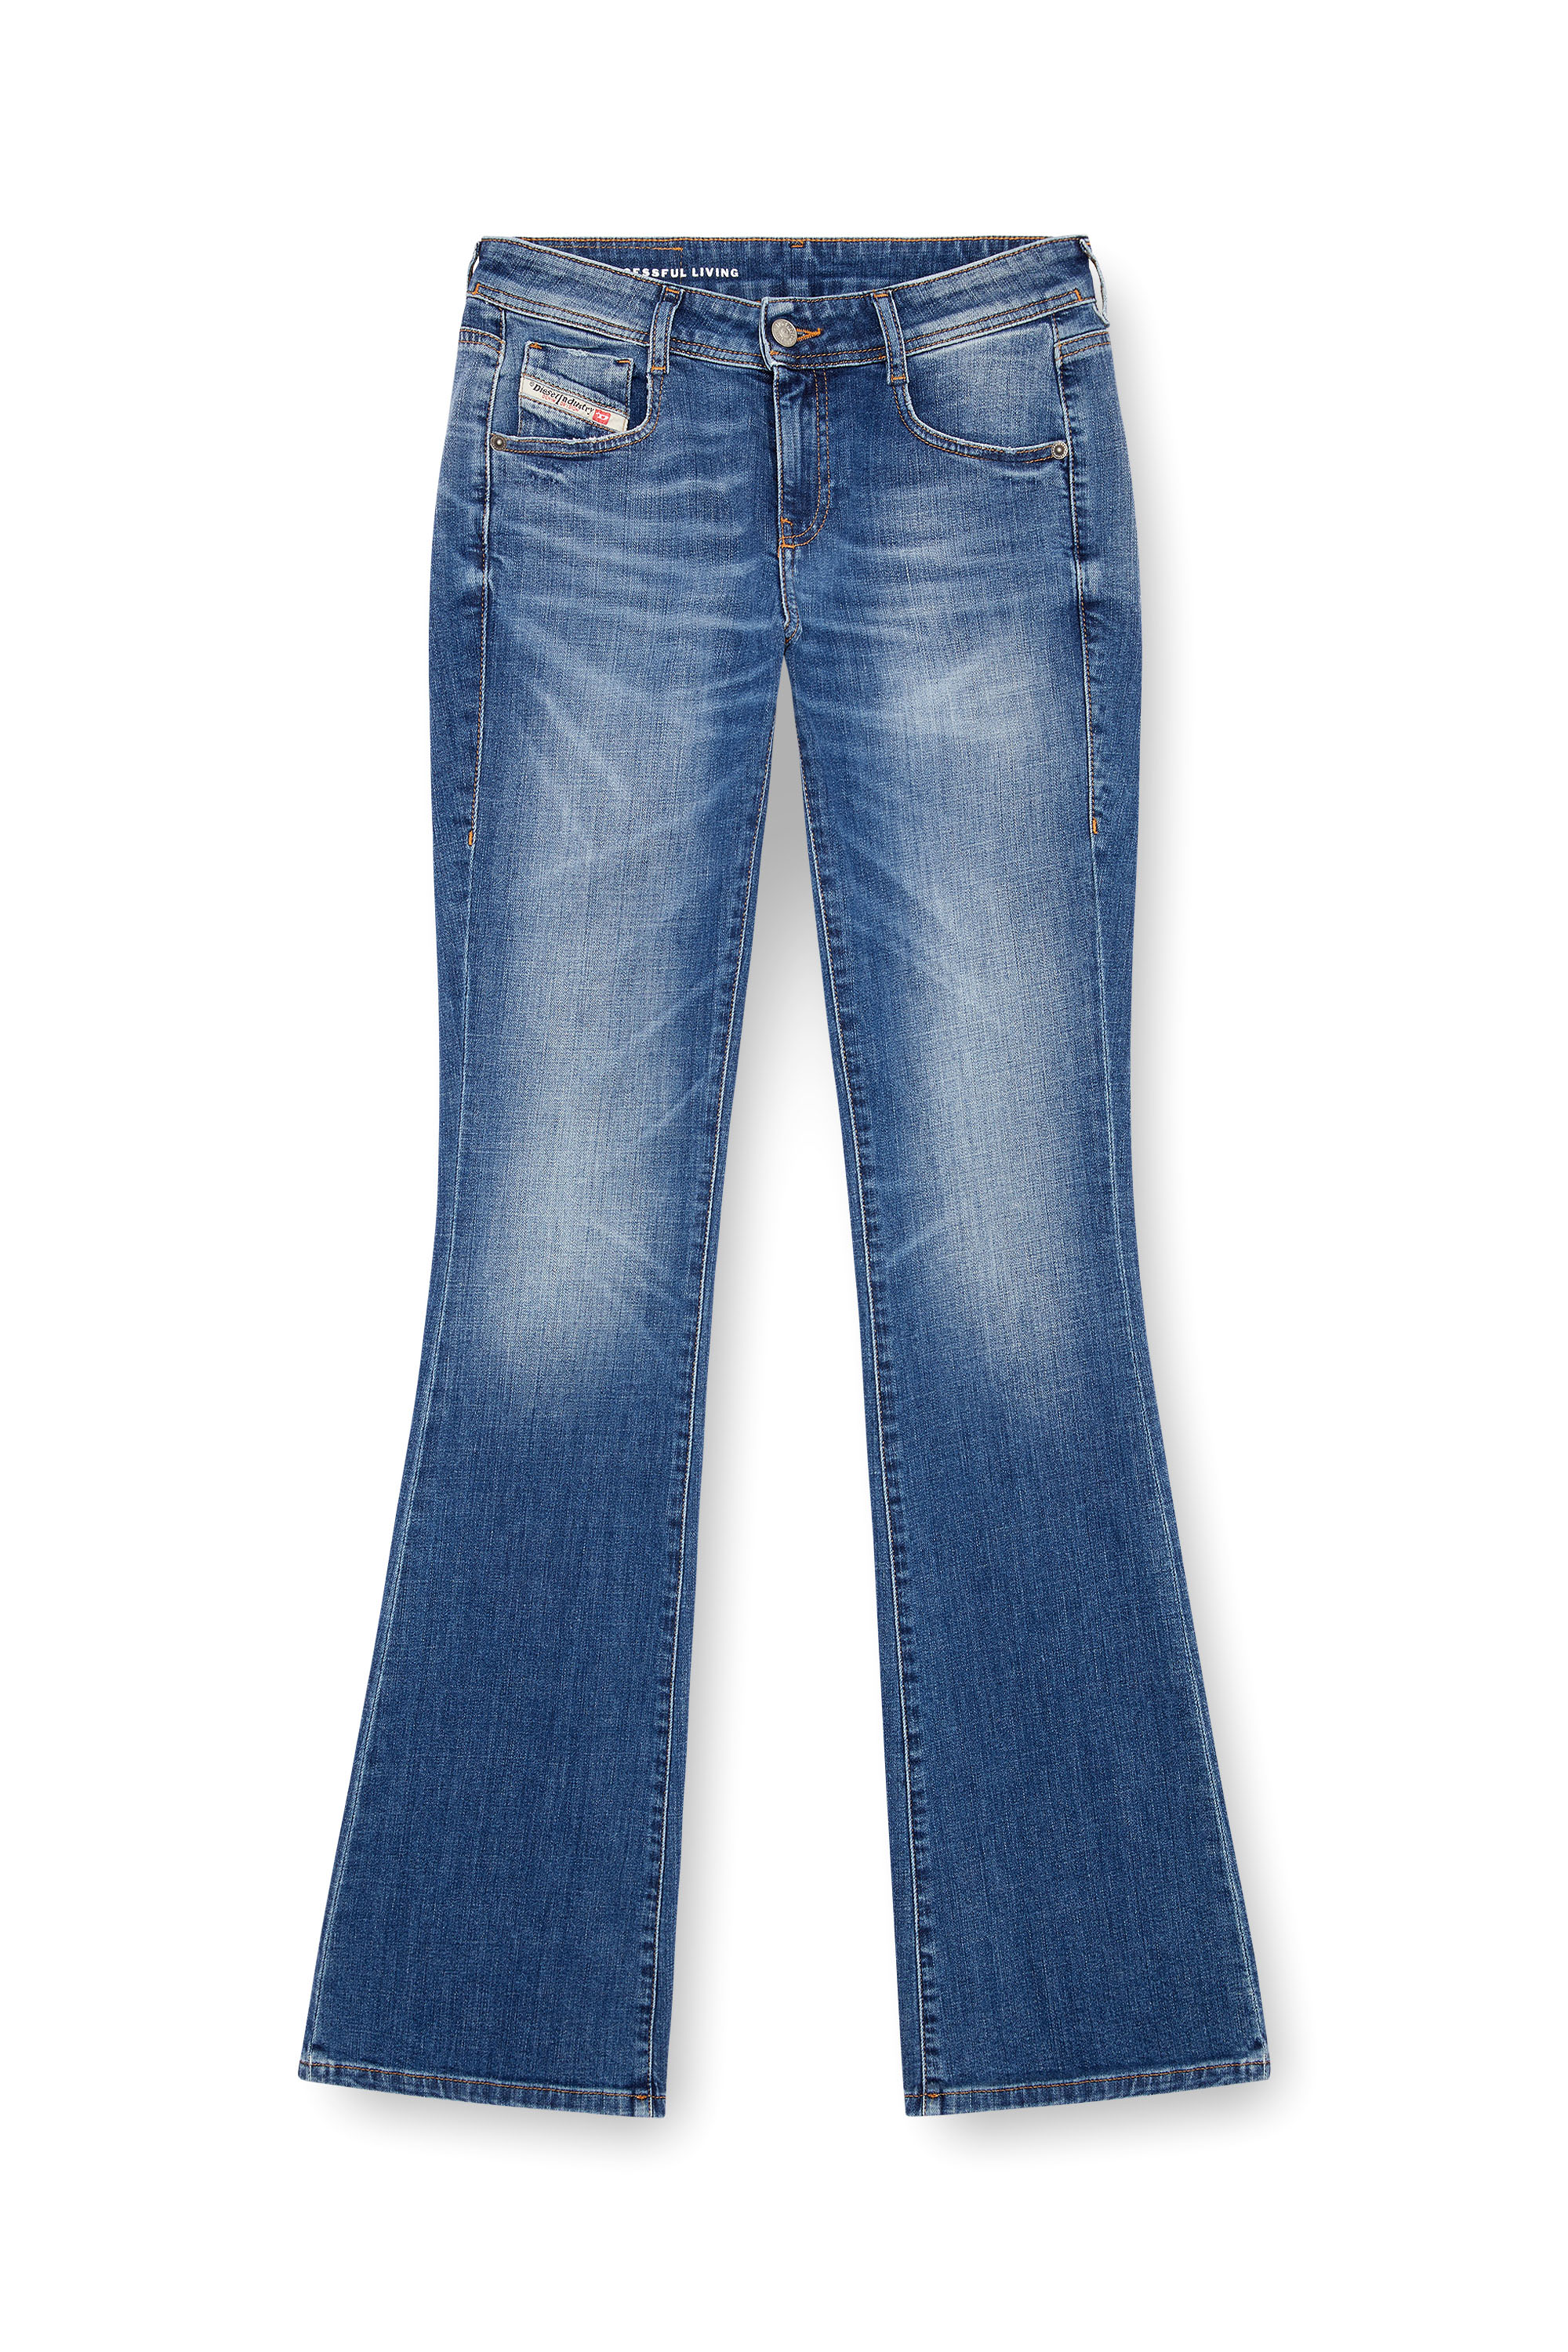 Diesel - Bootcut and Flare Jeans 1969 D-Ebbey 09J33, Mujer Bootcut y Flare Jeans - 1969 D-Ebbey in Azul marino - Image 1